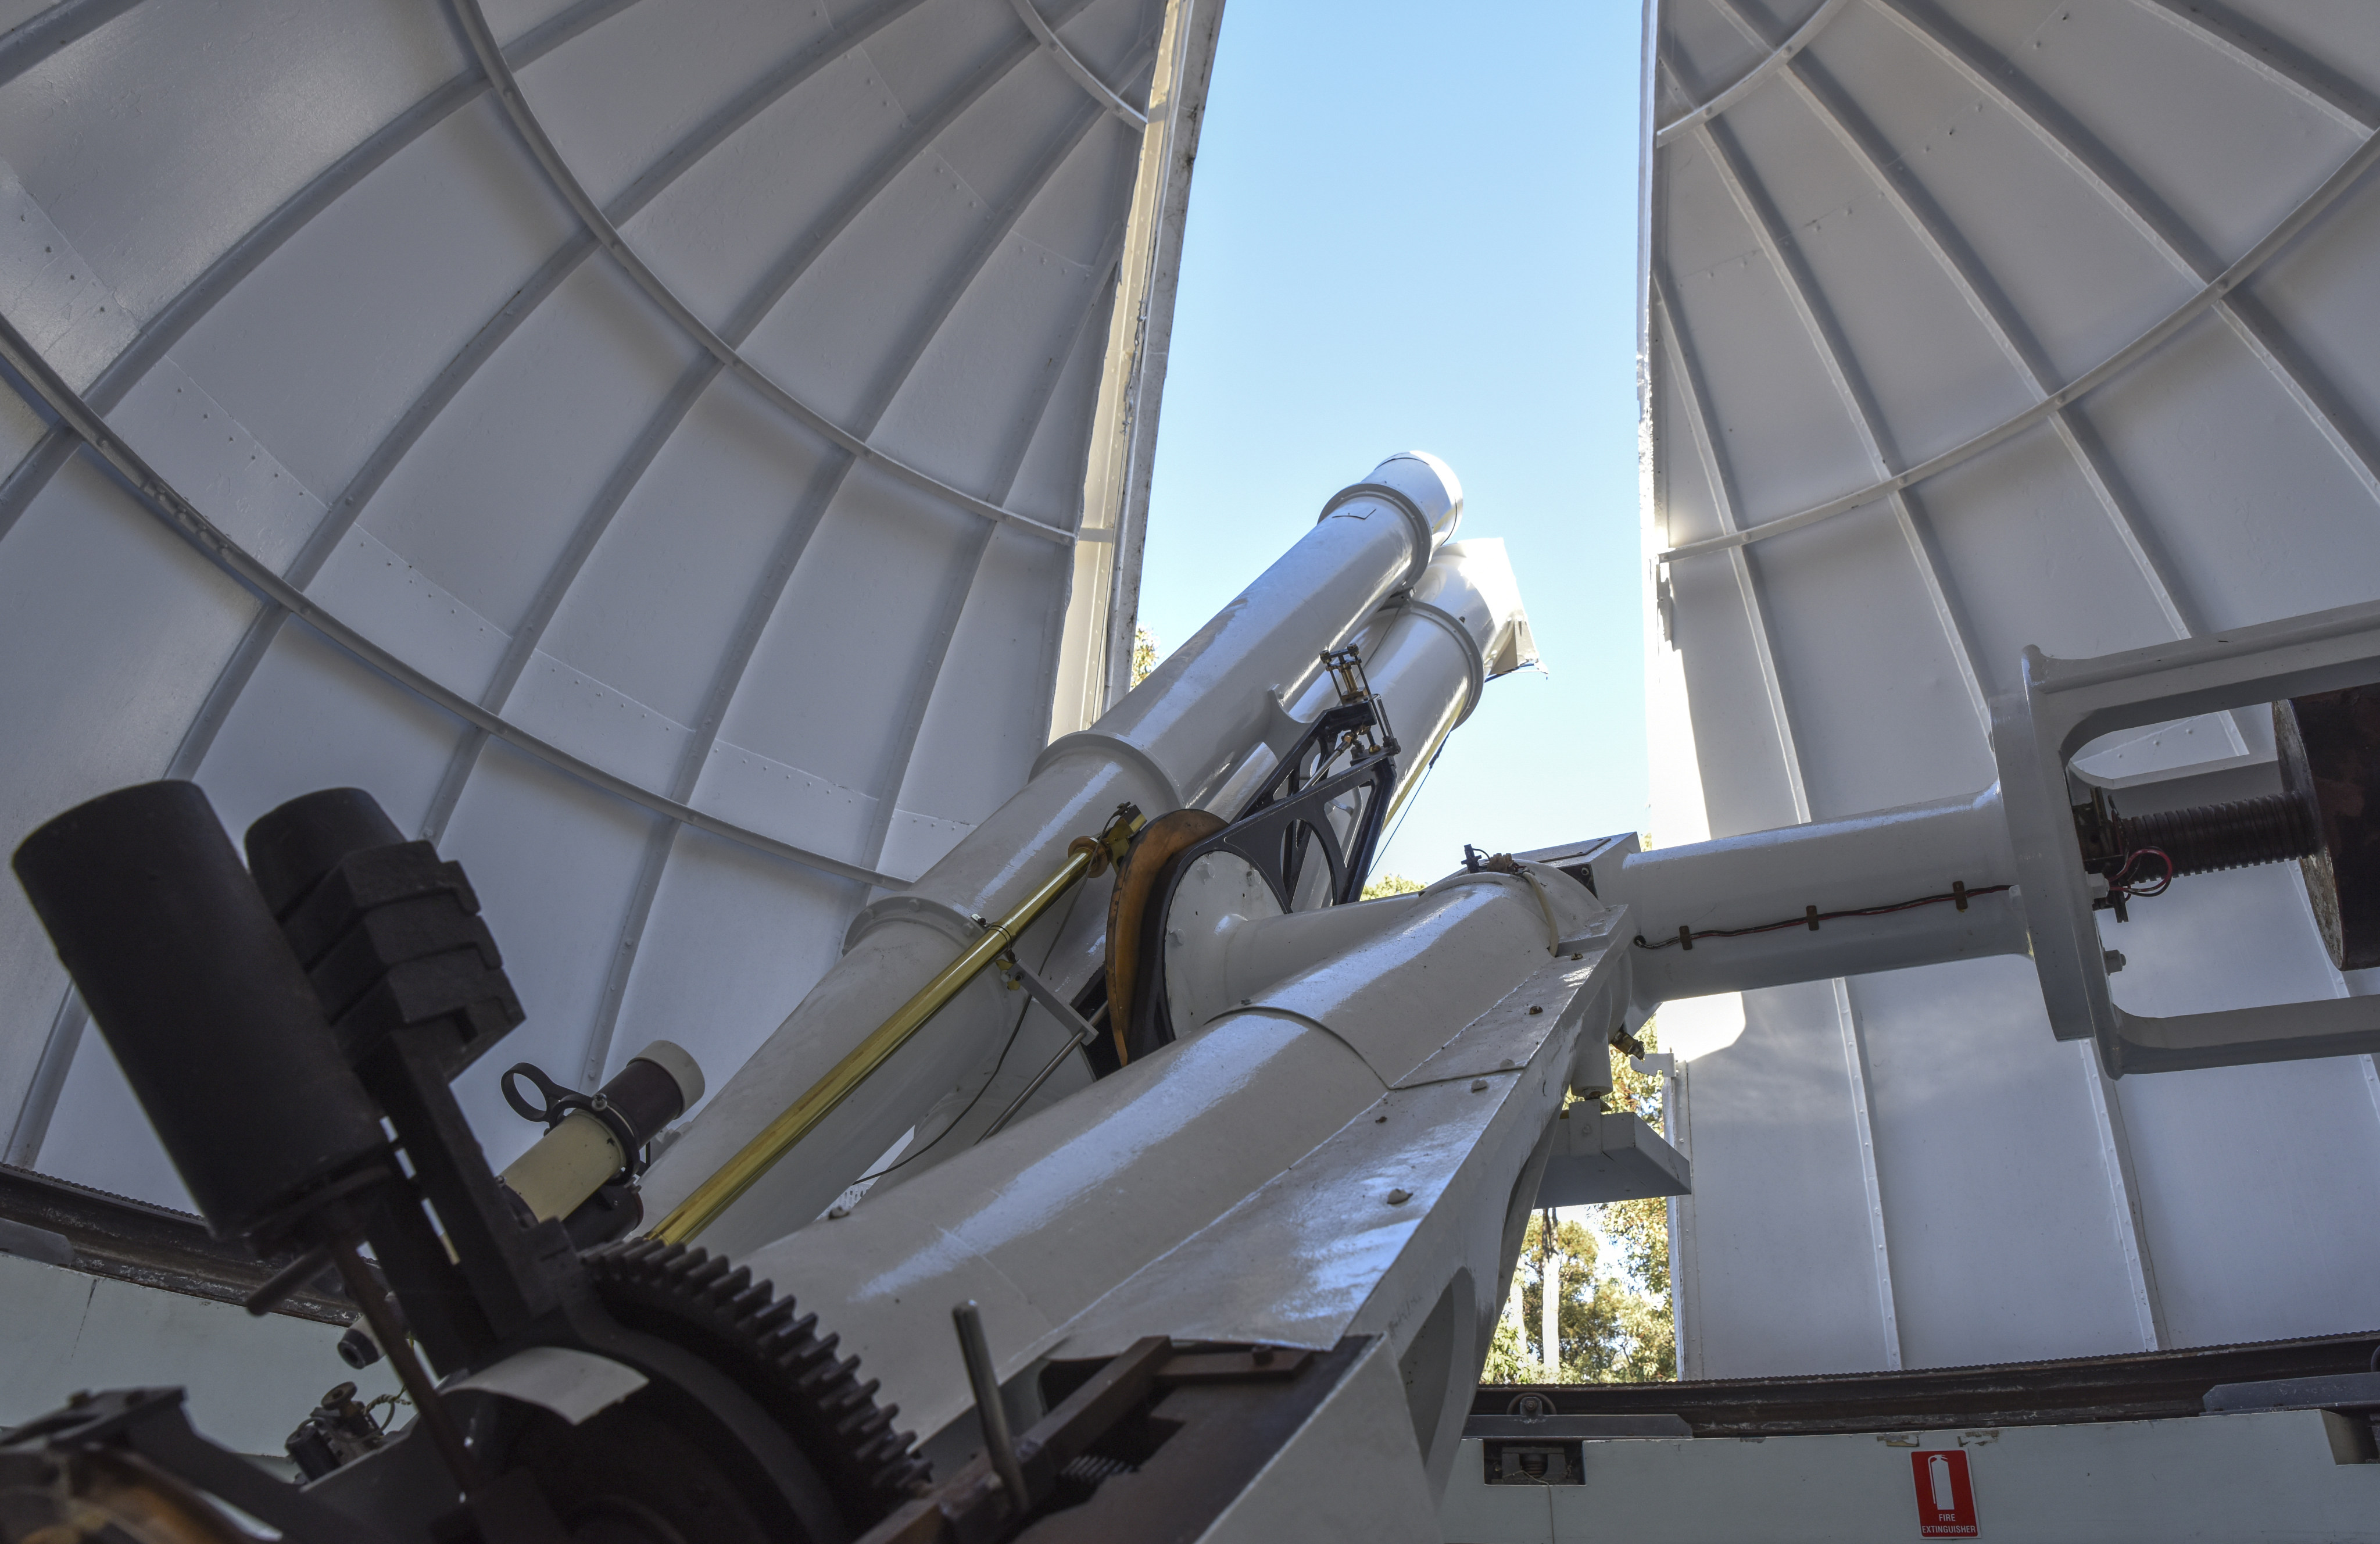 A space telescope at Perth Observatory in Western Australia. Photo: Ronan O’Connell